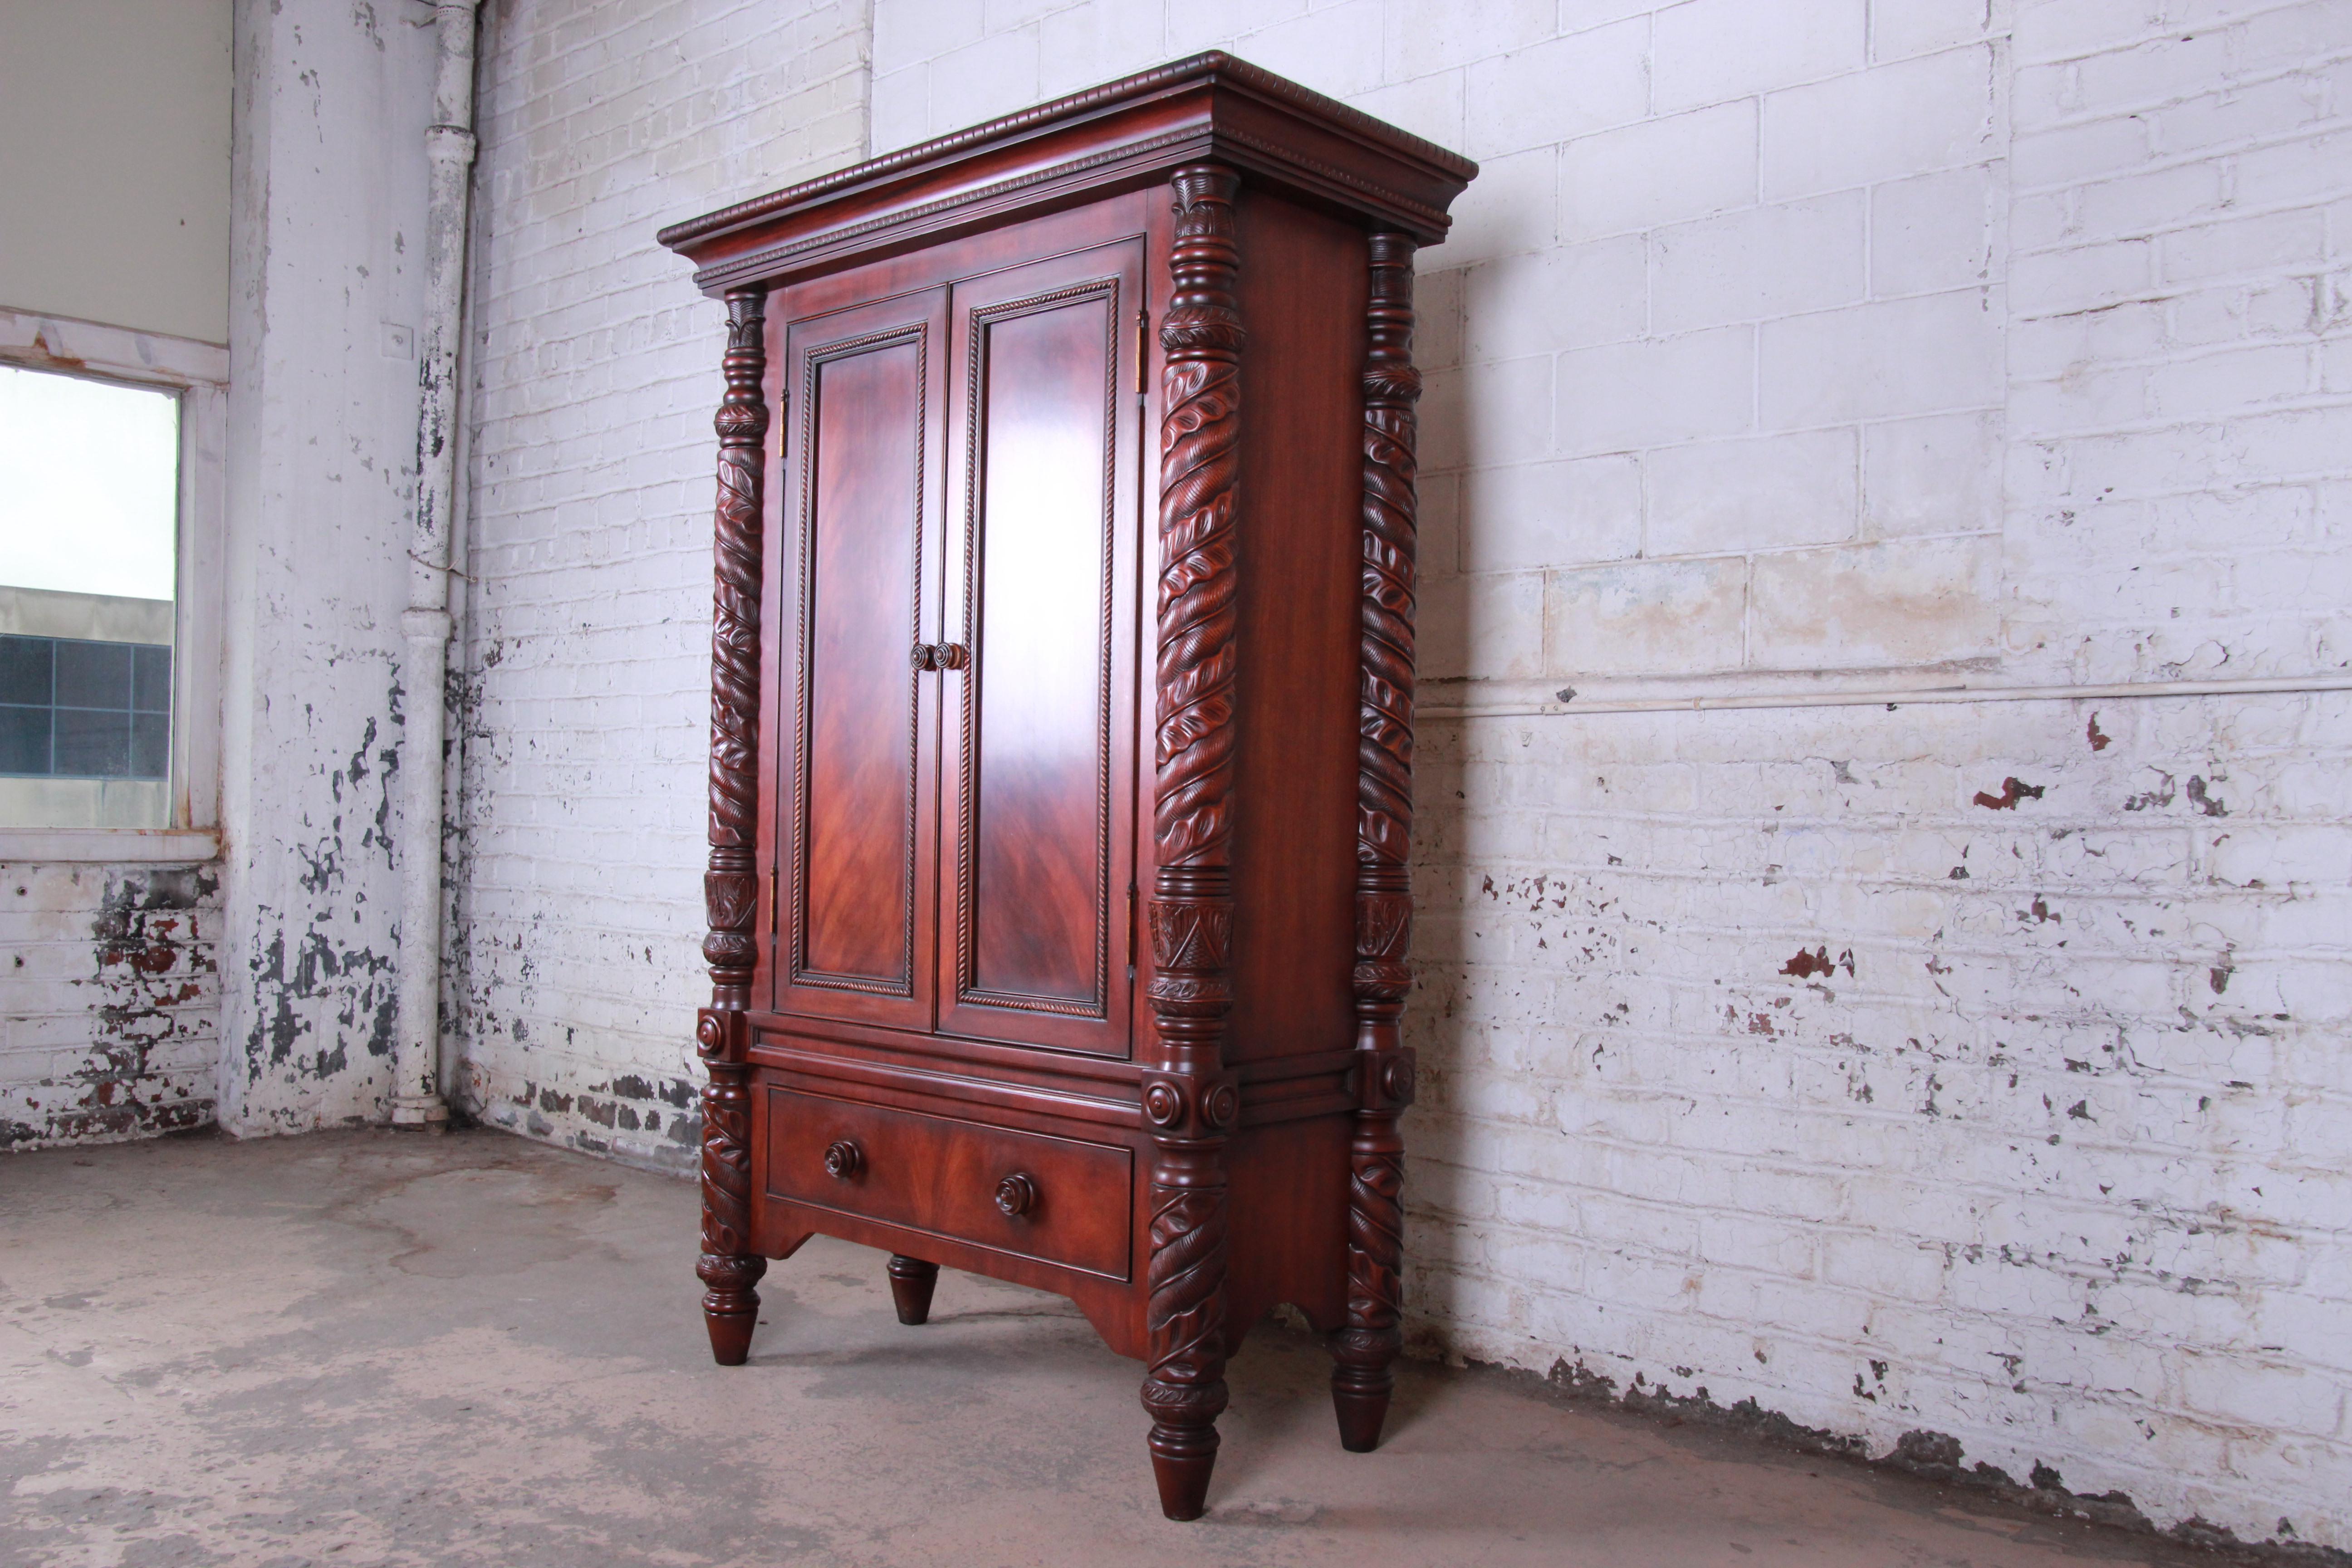 An exceptional mahogany armoire dresser from the Safari collection by Ralph Lauren. The armoire features gorgeous flame mahogany wood grain and ornately carved solid mahogany post legs with a tobacco leaf motif. It offers ample storage, with three